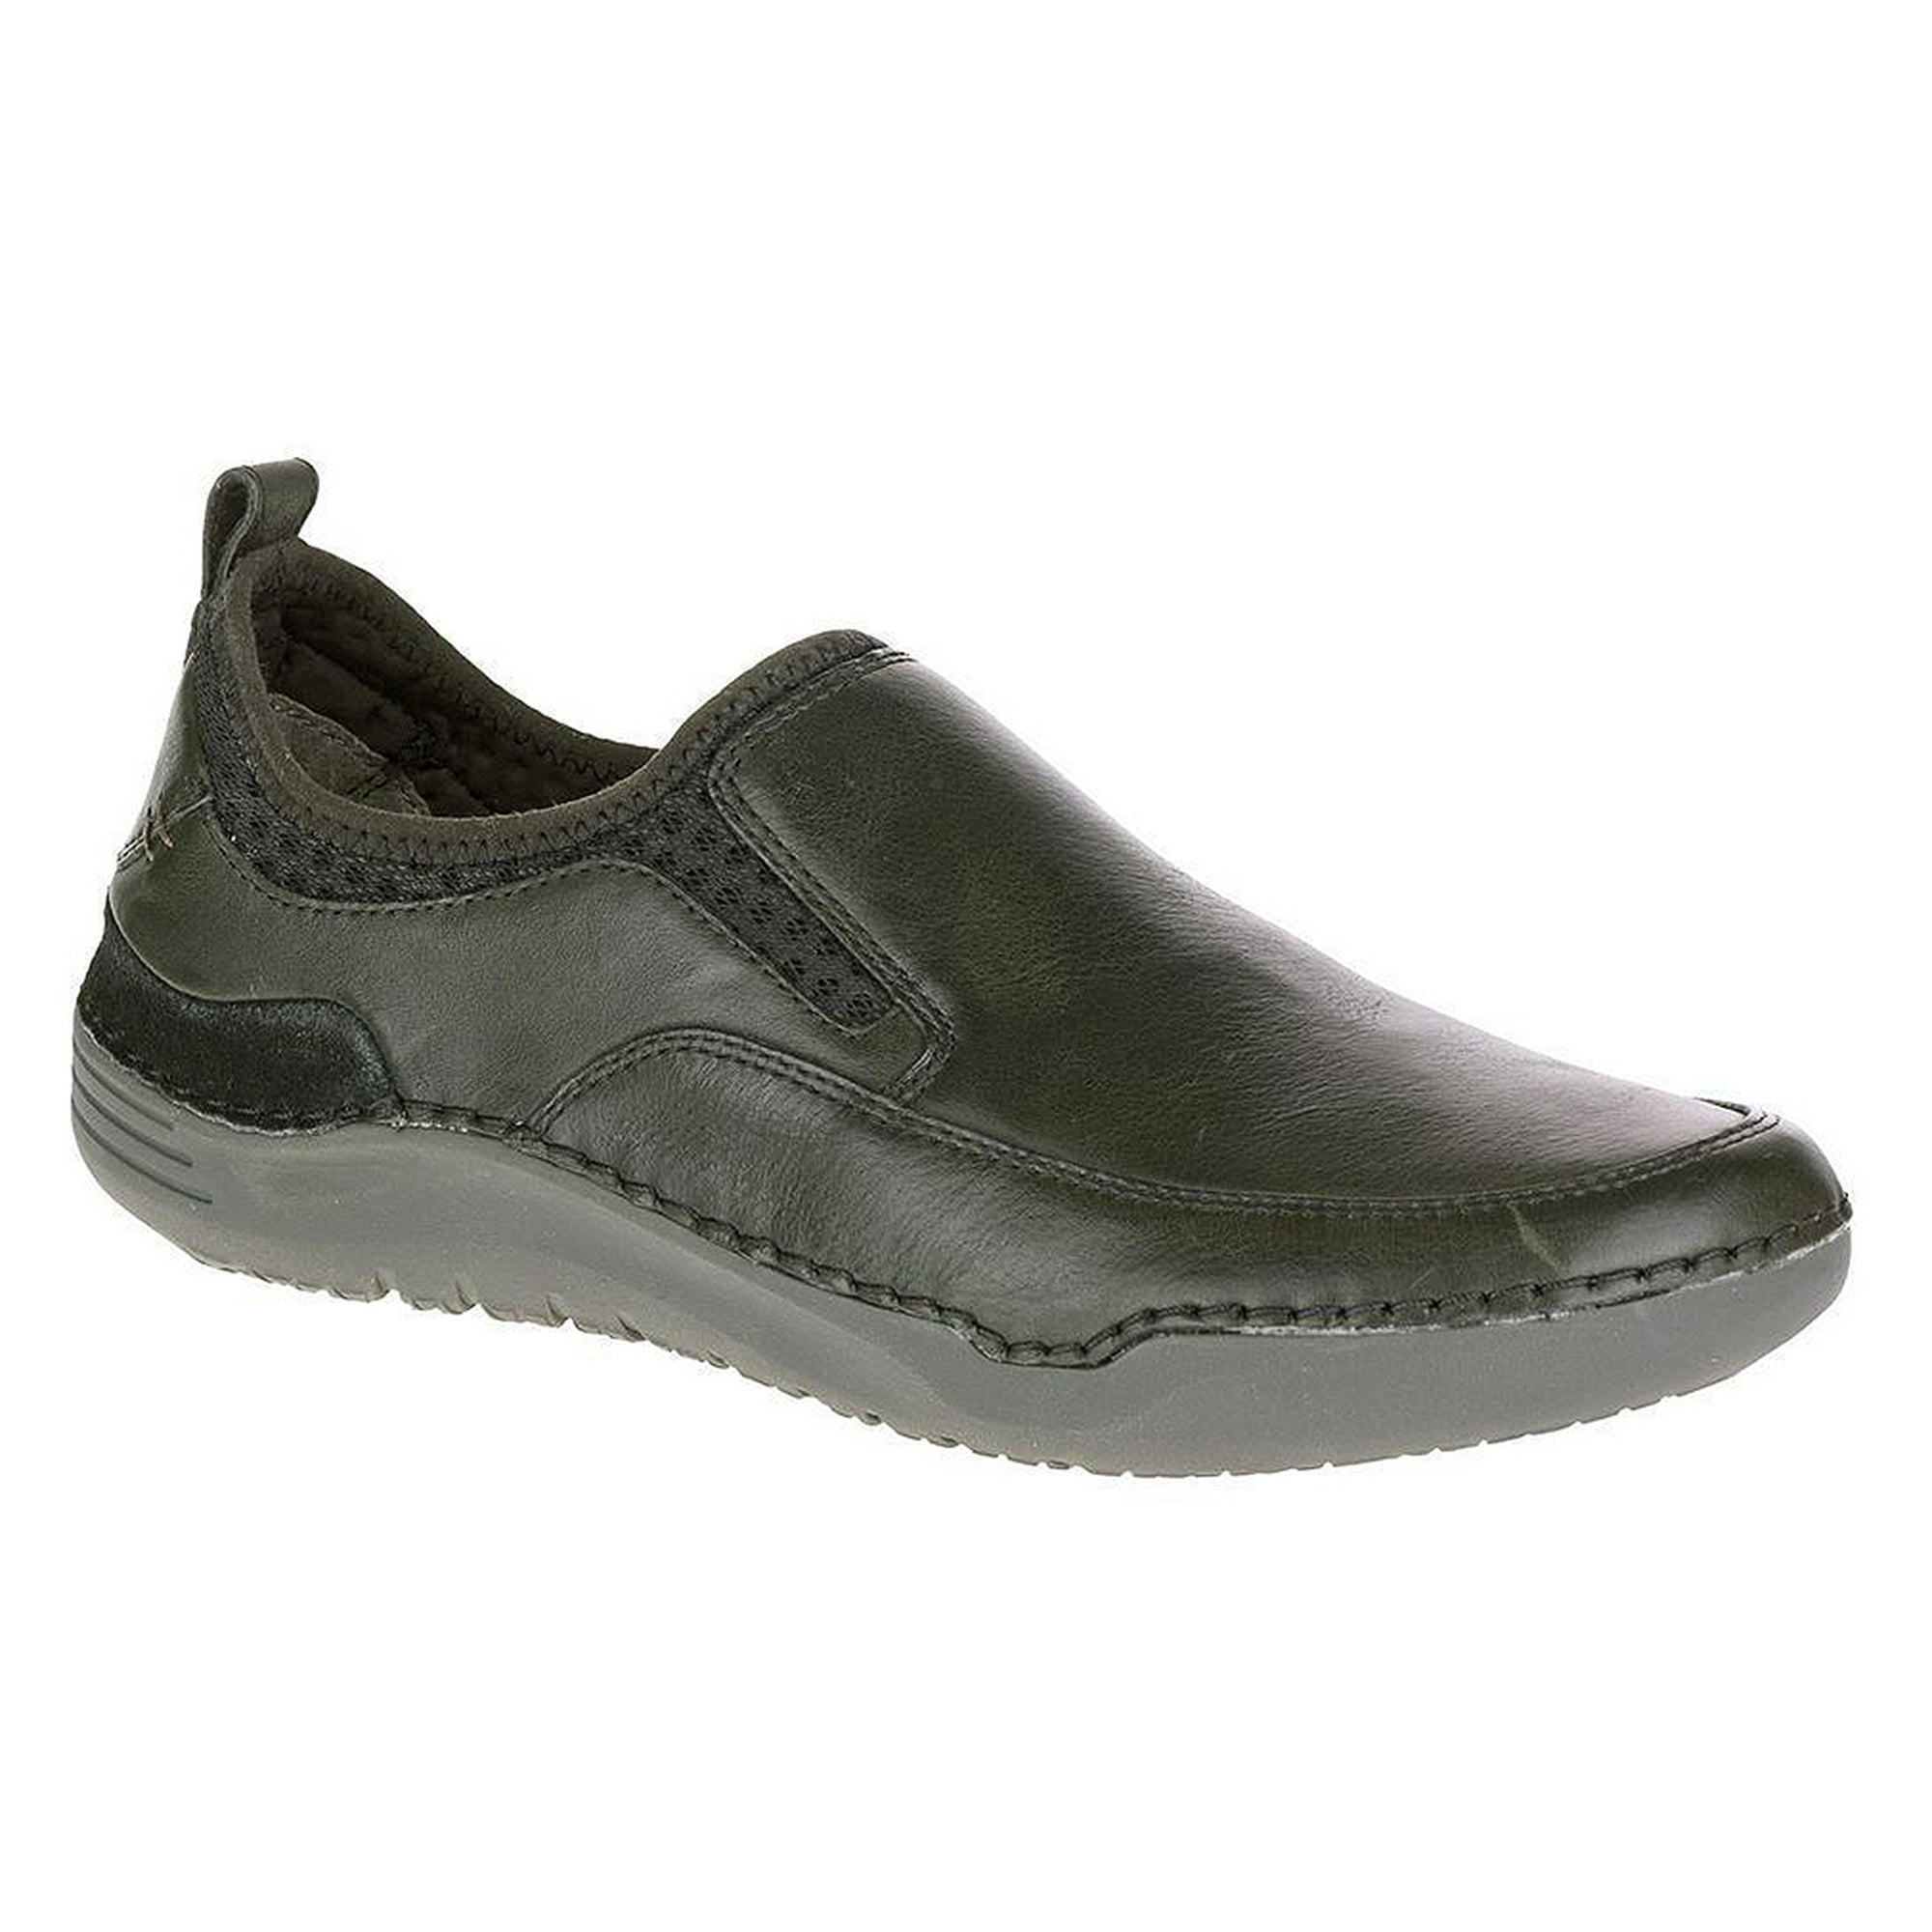 Cusco Moden Misvisende NEW Mens Hush Puppies Crofton Method Casual Shoes/Slip-On - Pick Size &  Color - Walmart.com